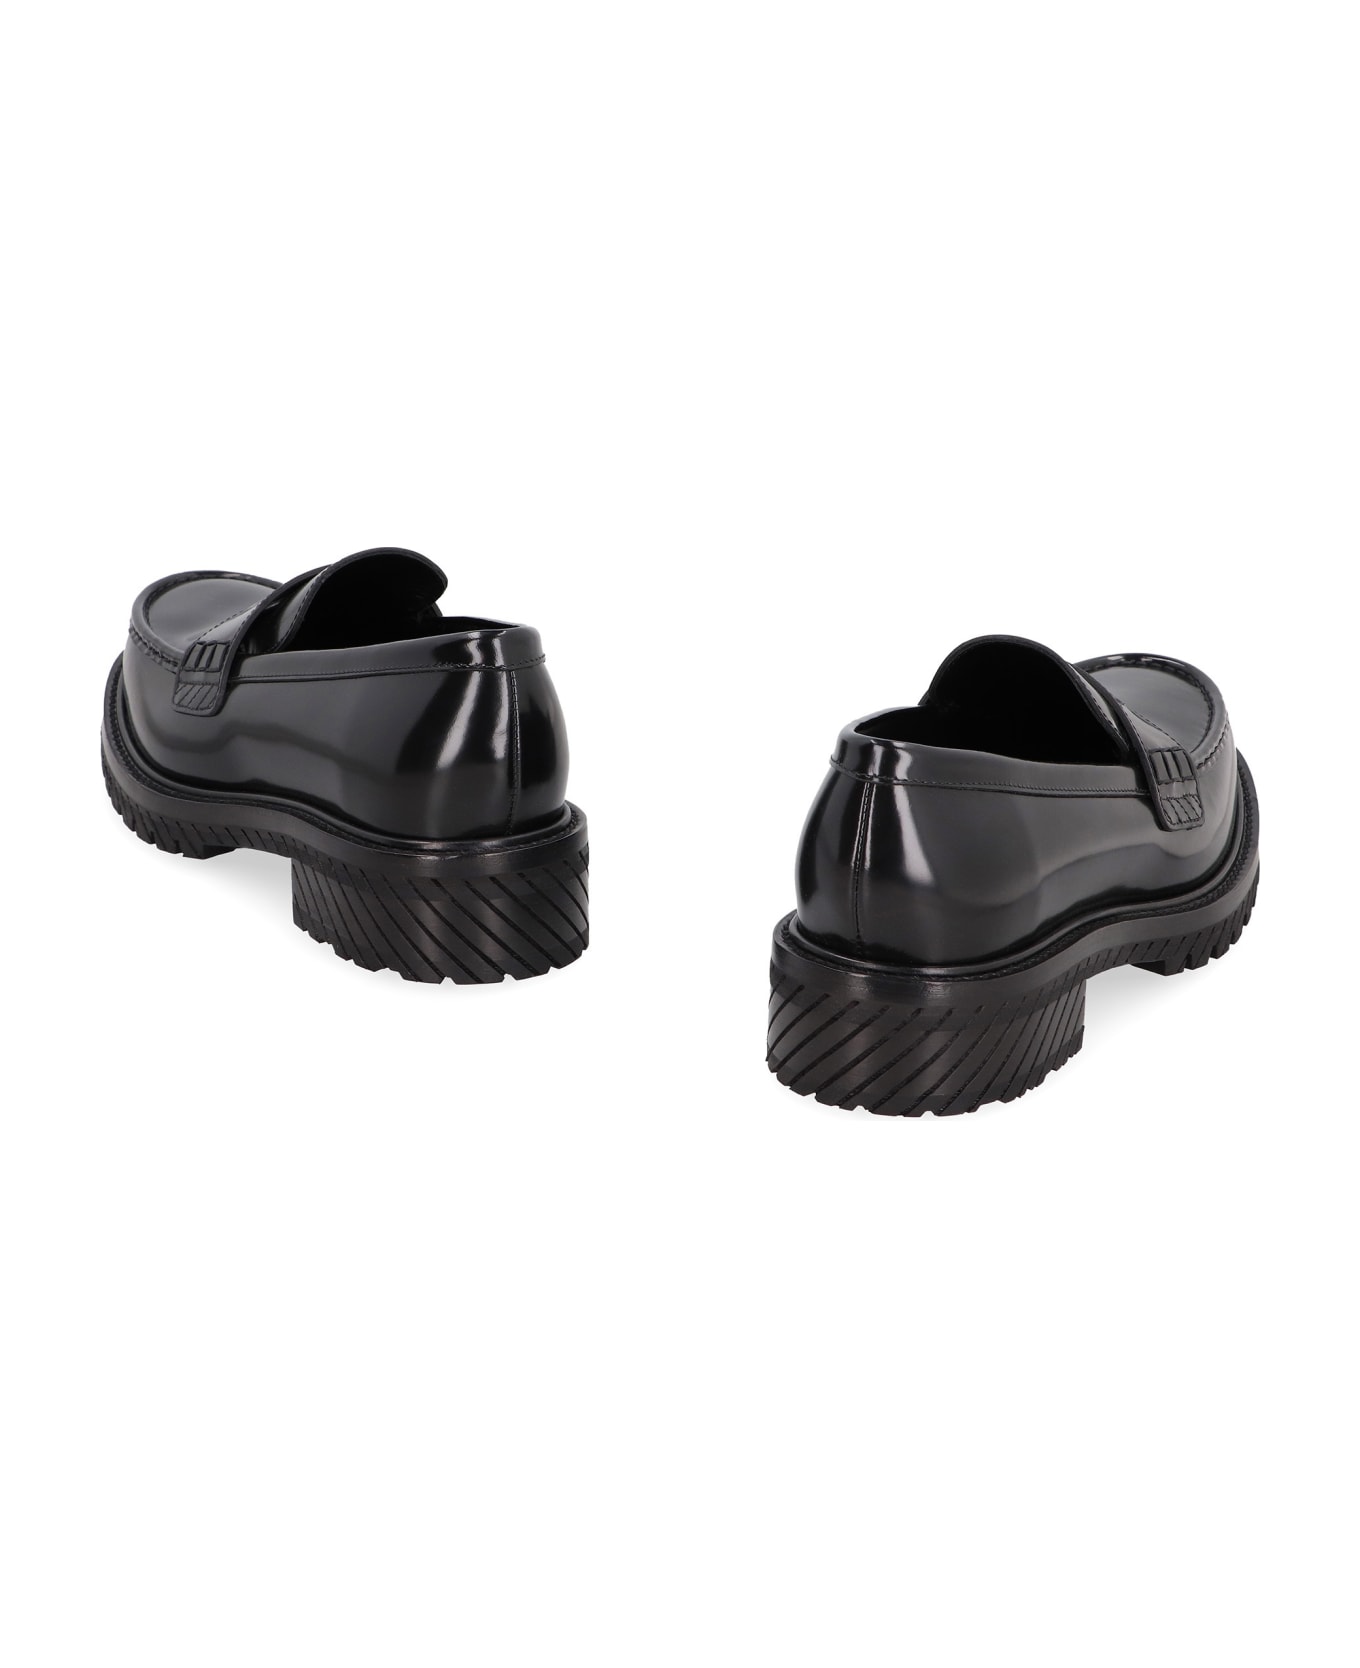 Off-White Combat Leather Loafers - black